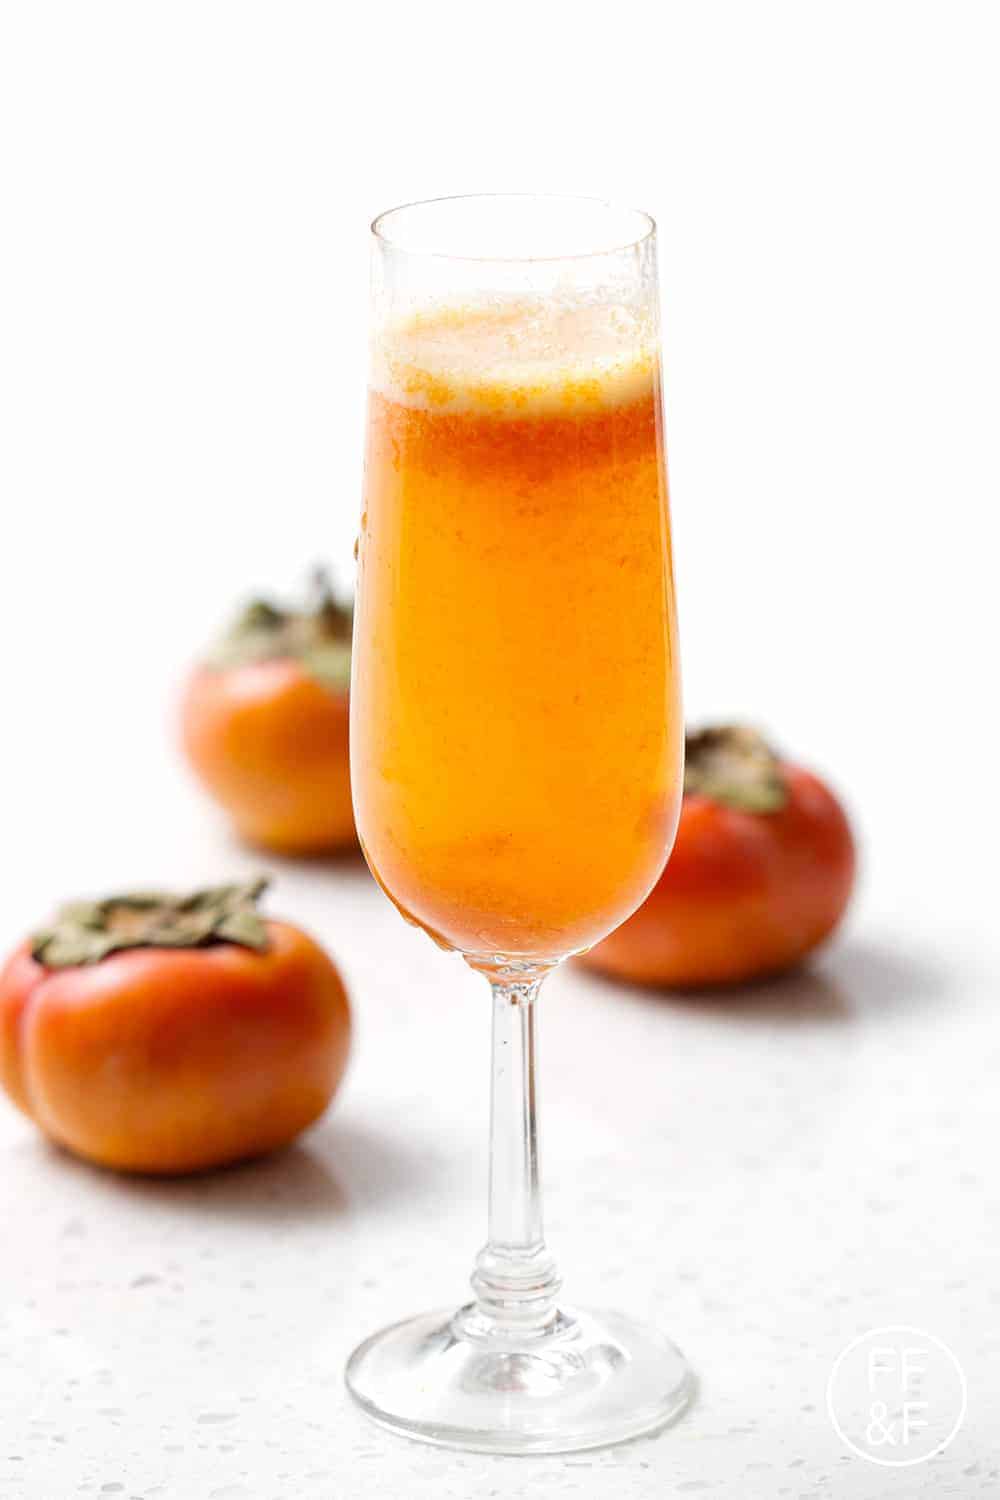 Spicy Persimmon Sparkler - The Honest Spoonful